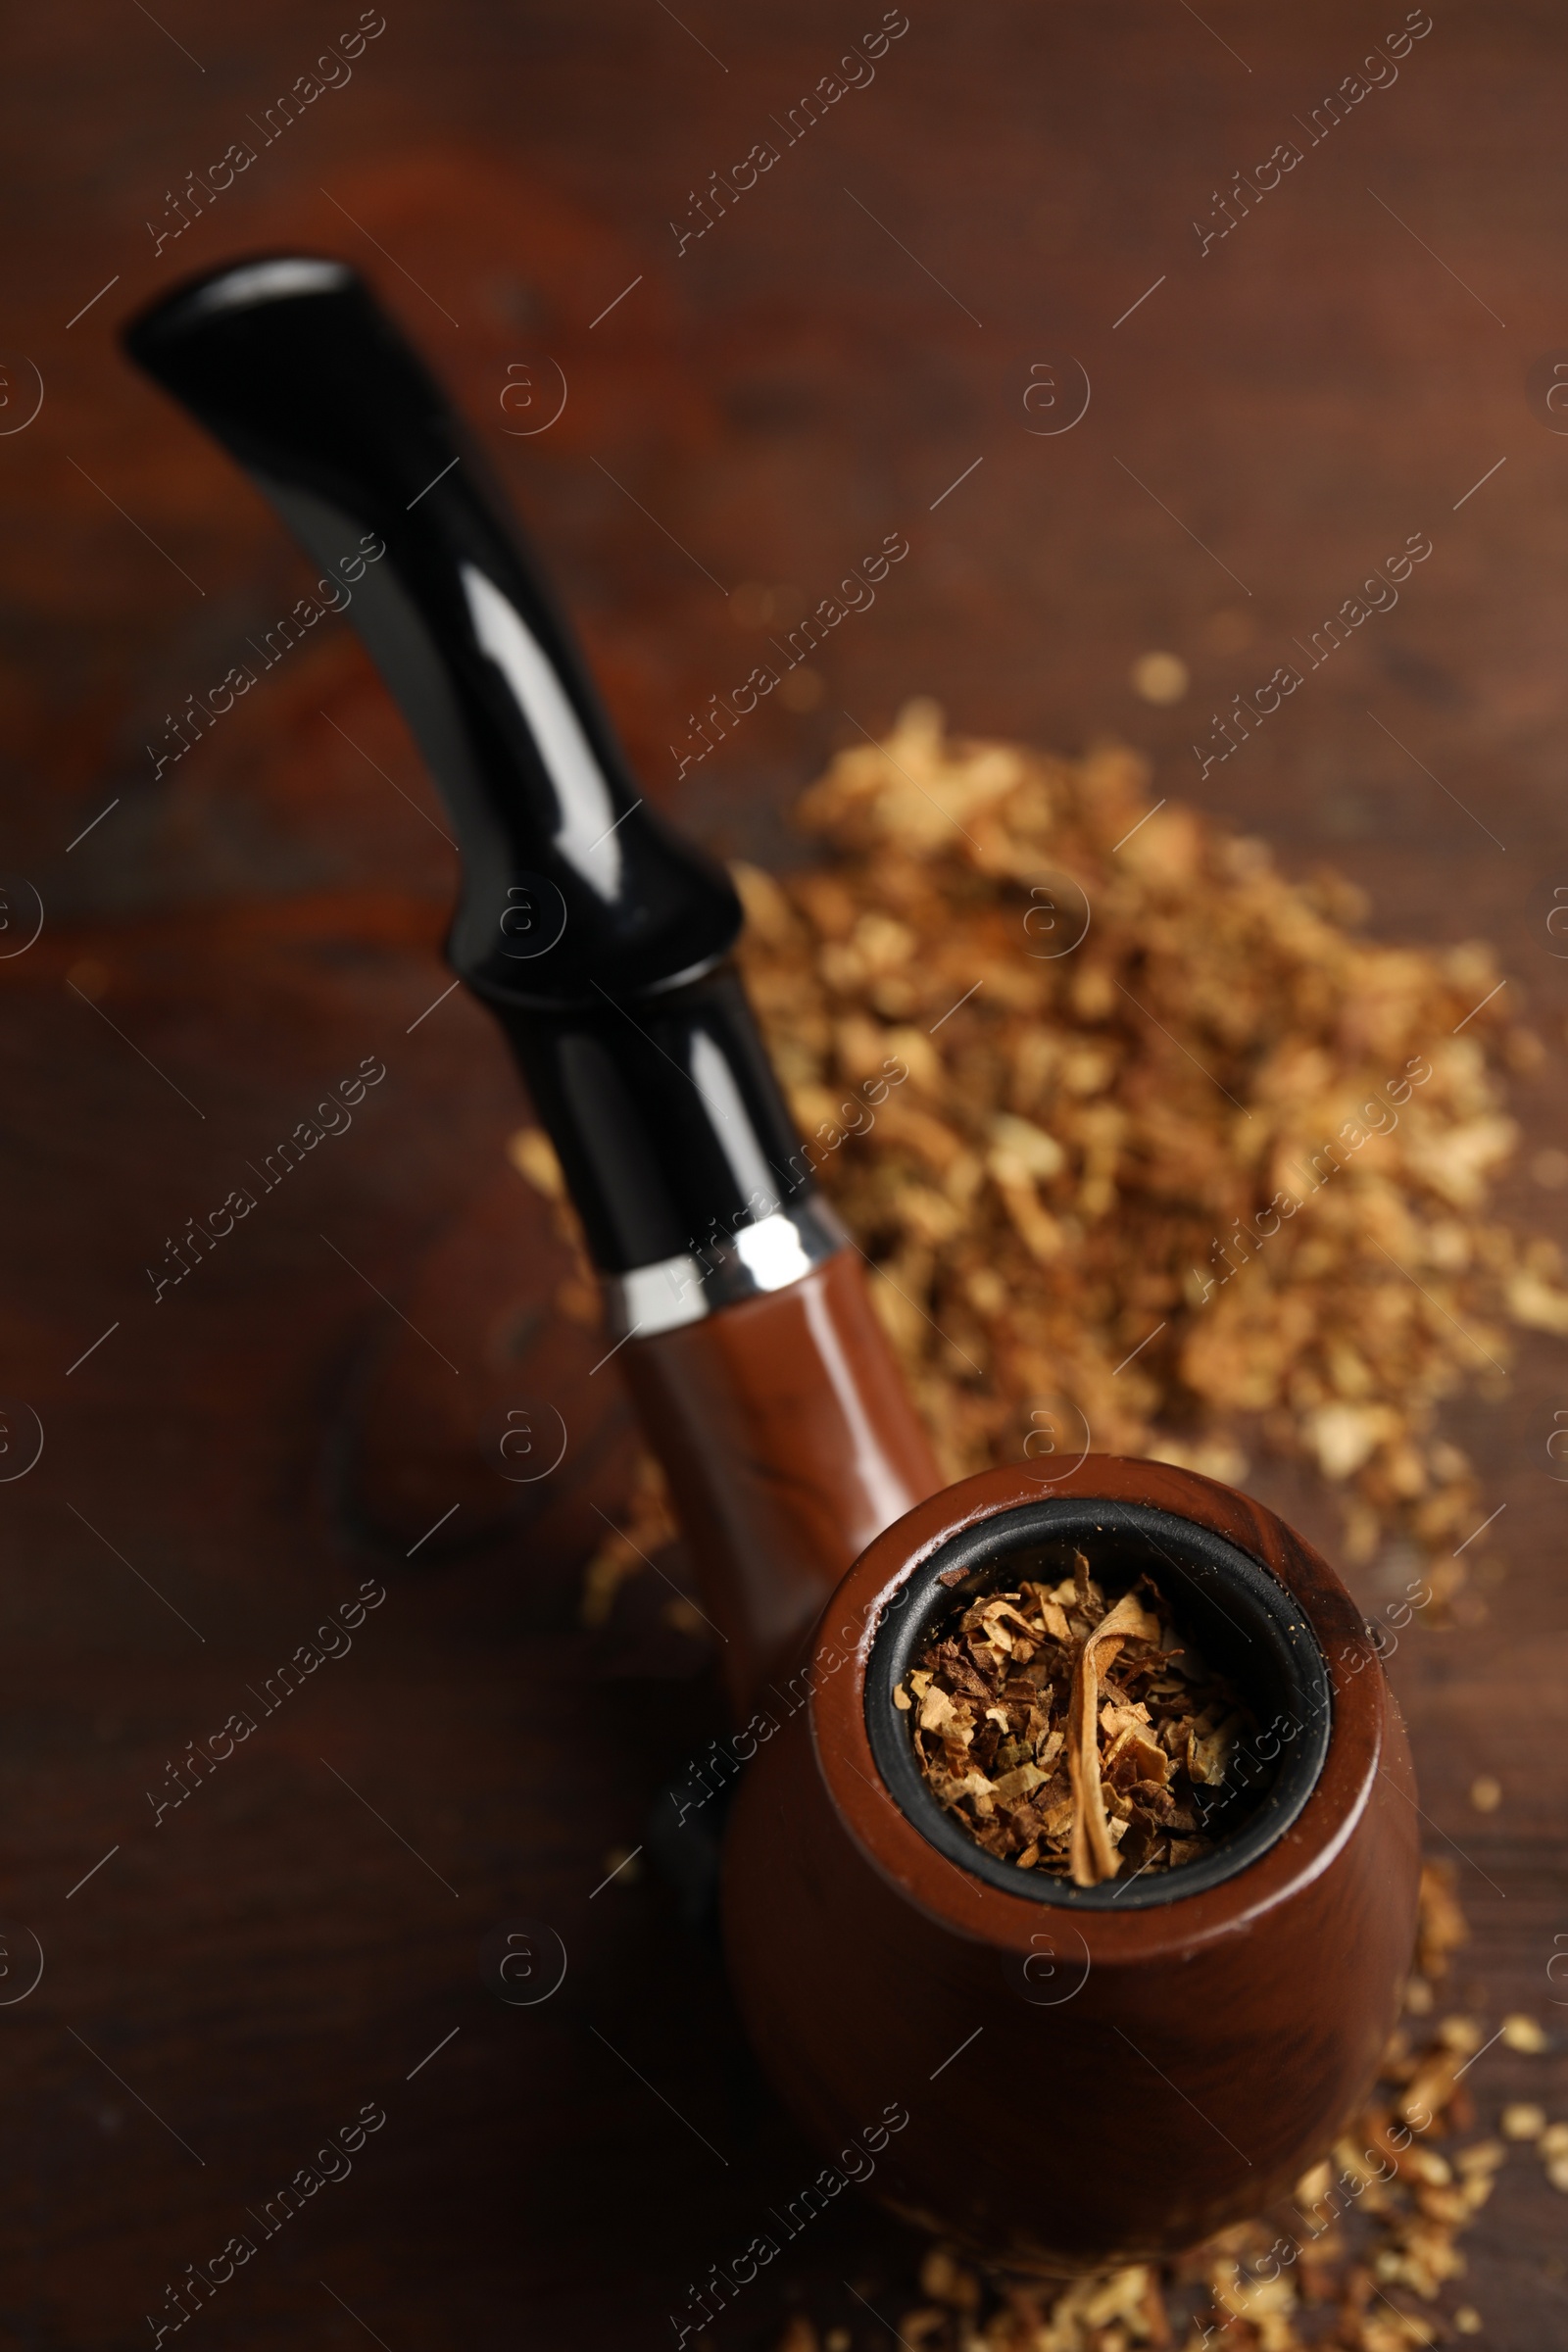 Photo of Smoking pipe with tobacco on wooden table, above view